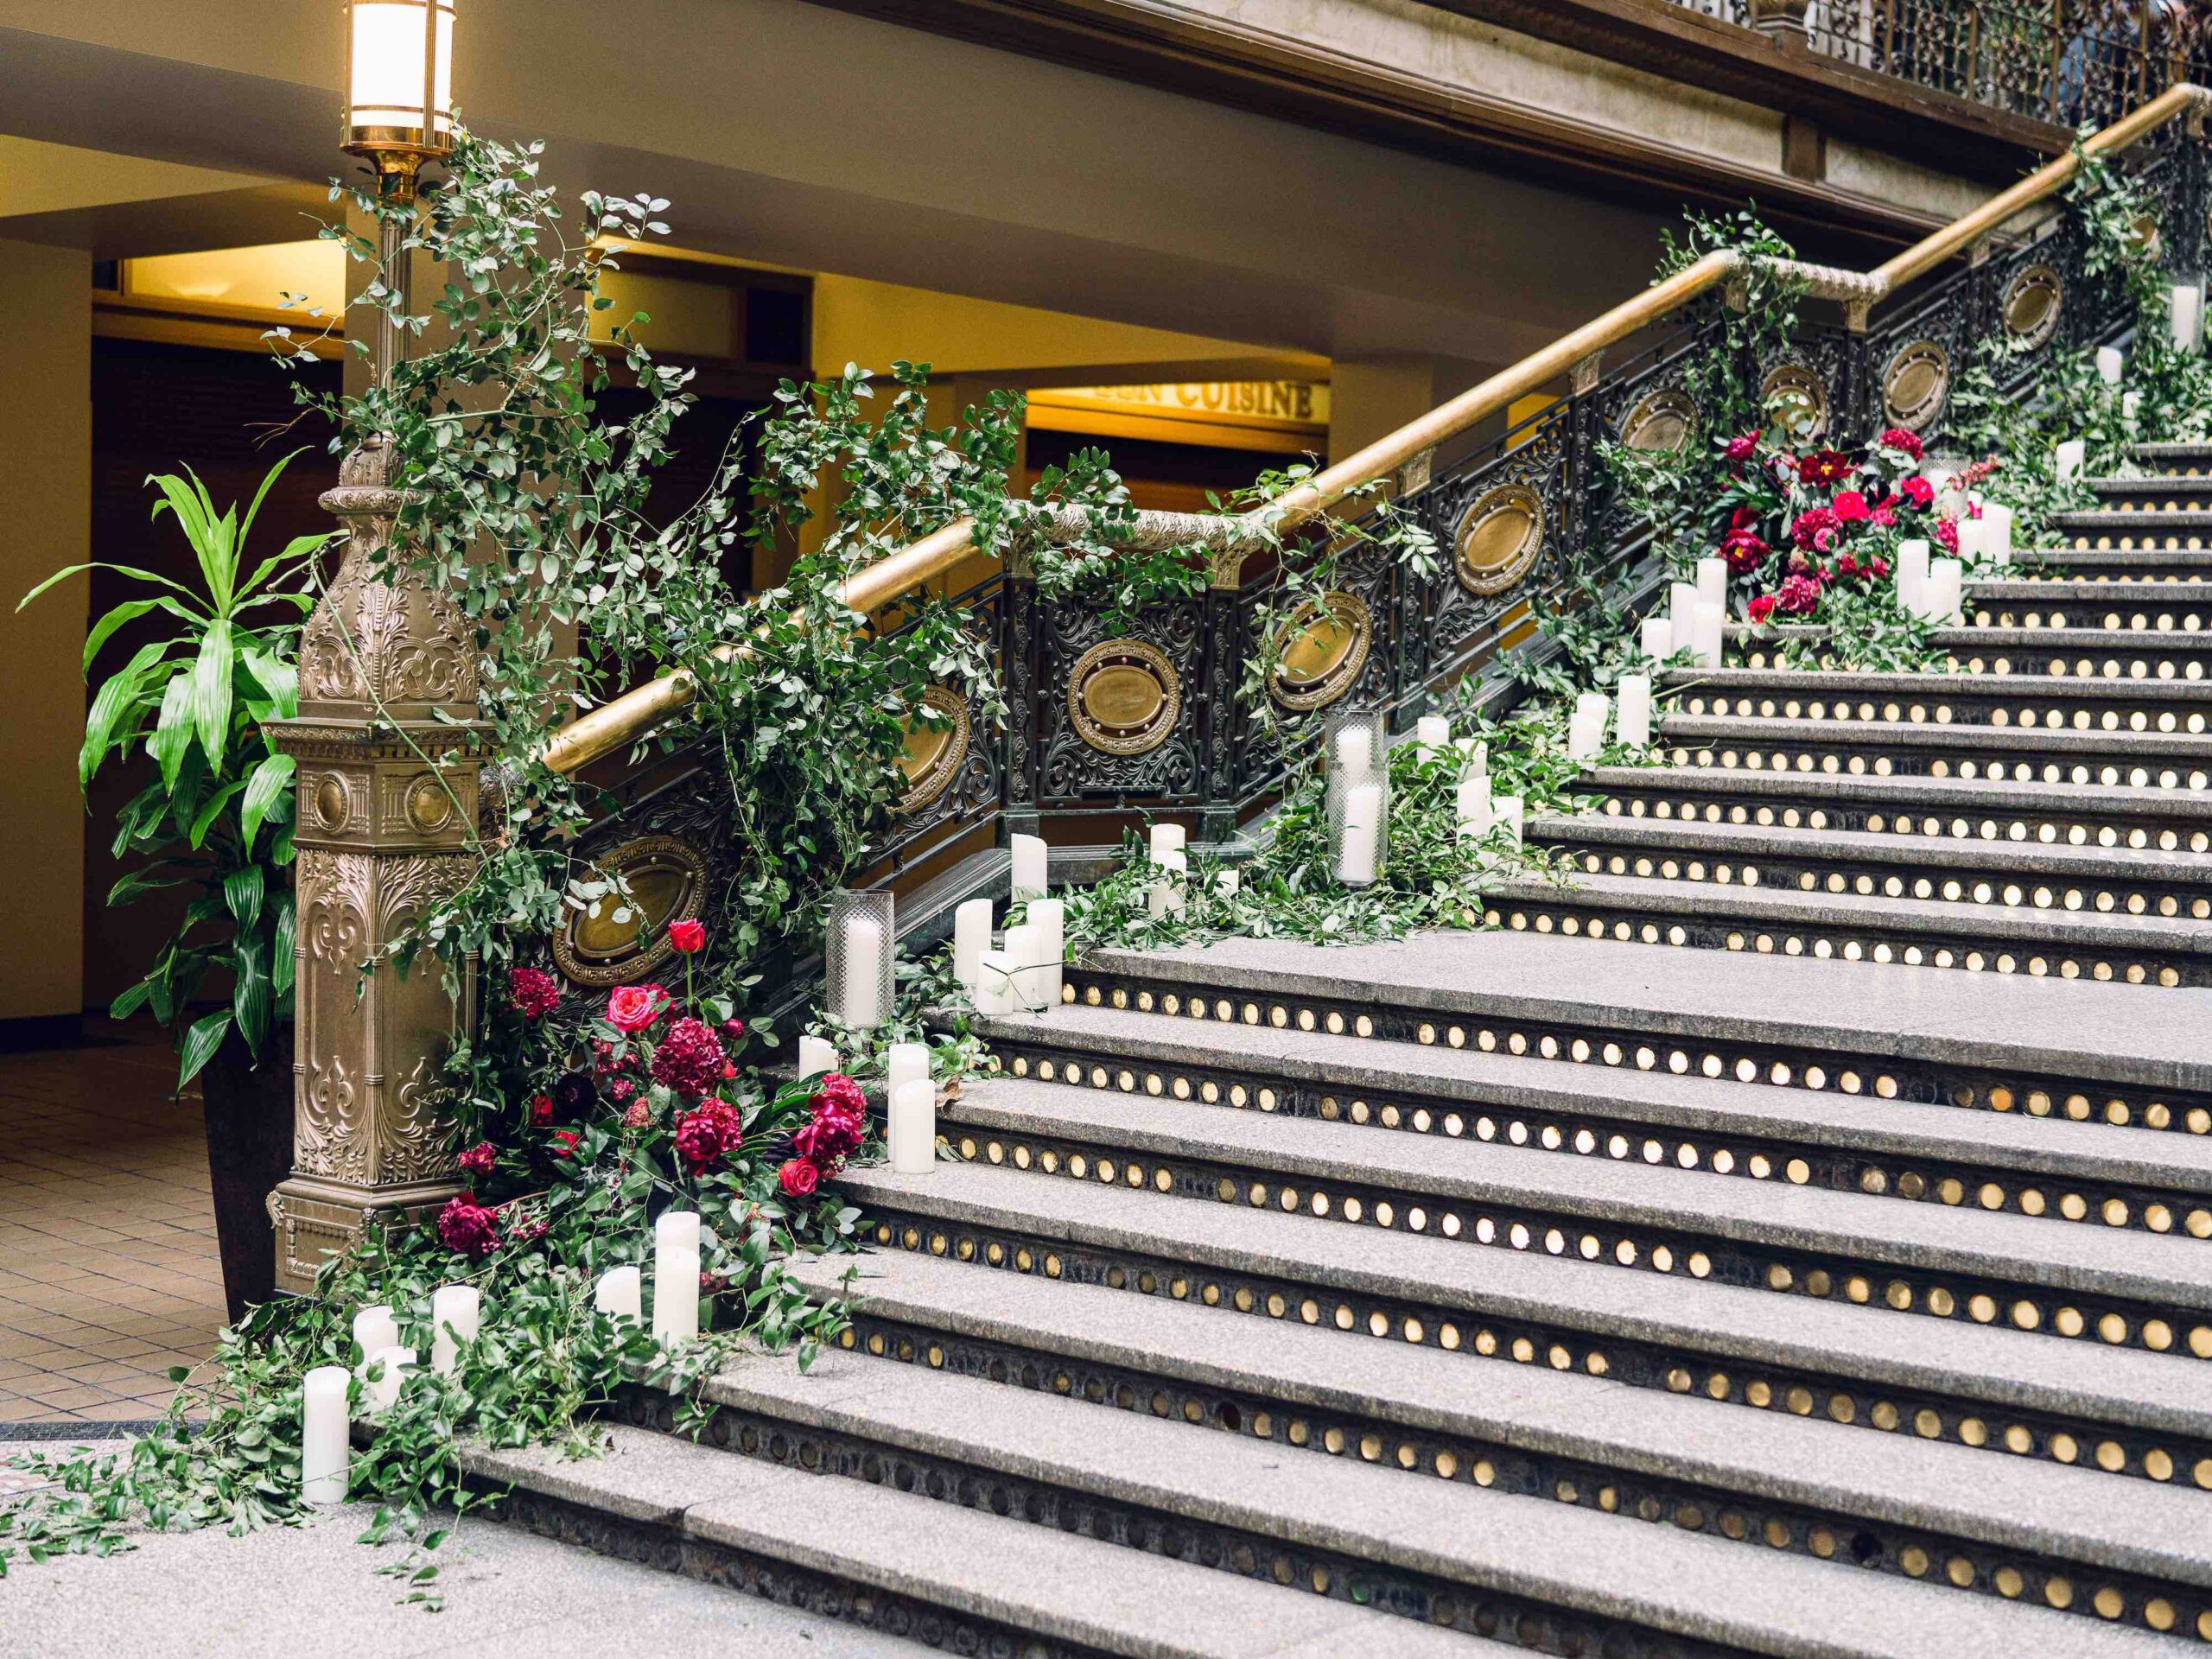 Main Staircase at Hyatt Cleveland with candle light and flowers for a winter wedding, flower by HeatherLily